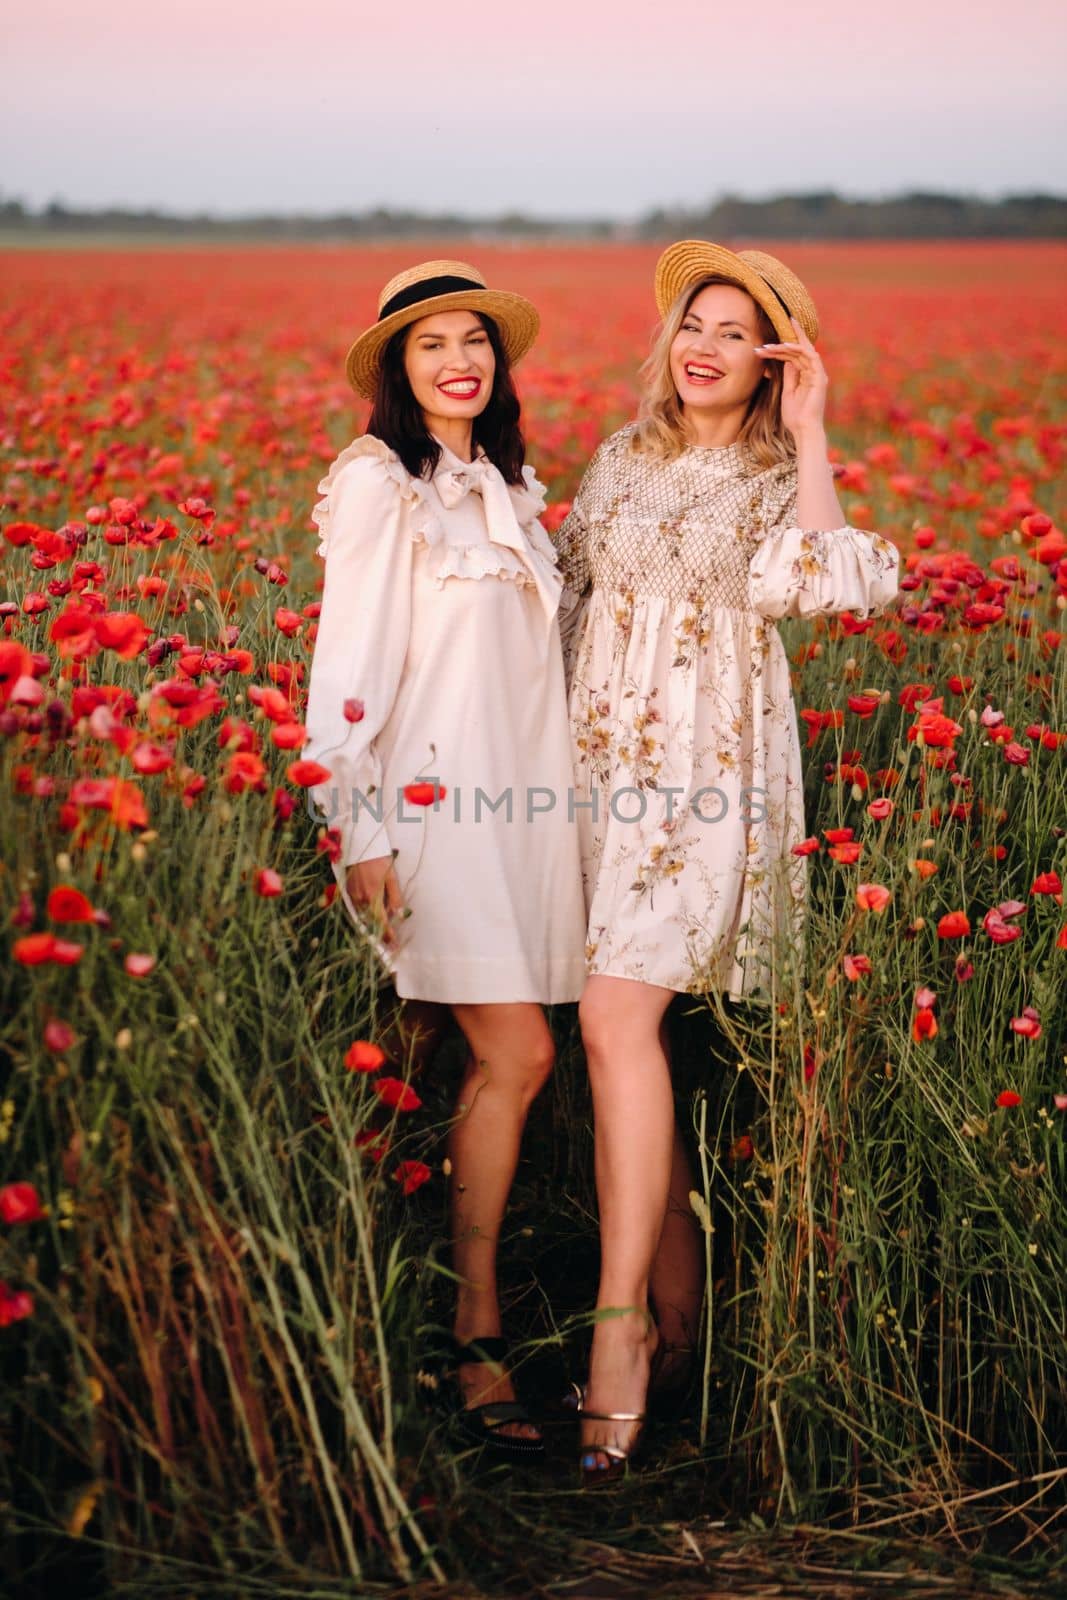 Two girlfriends in dresses and a hat in a poppy field in summer at sunset.